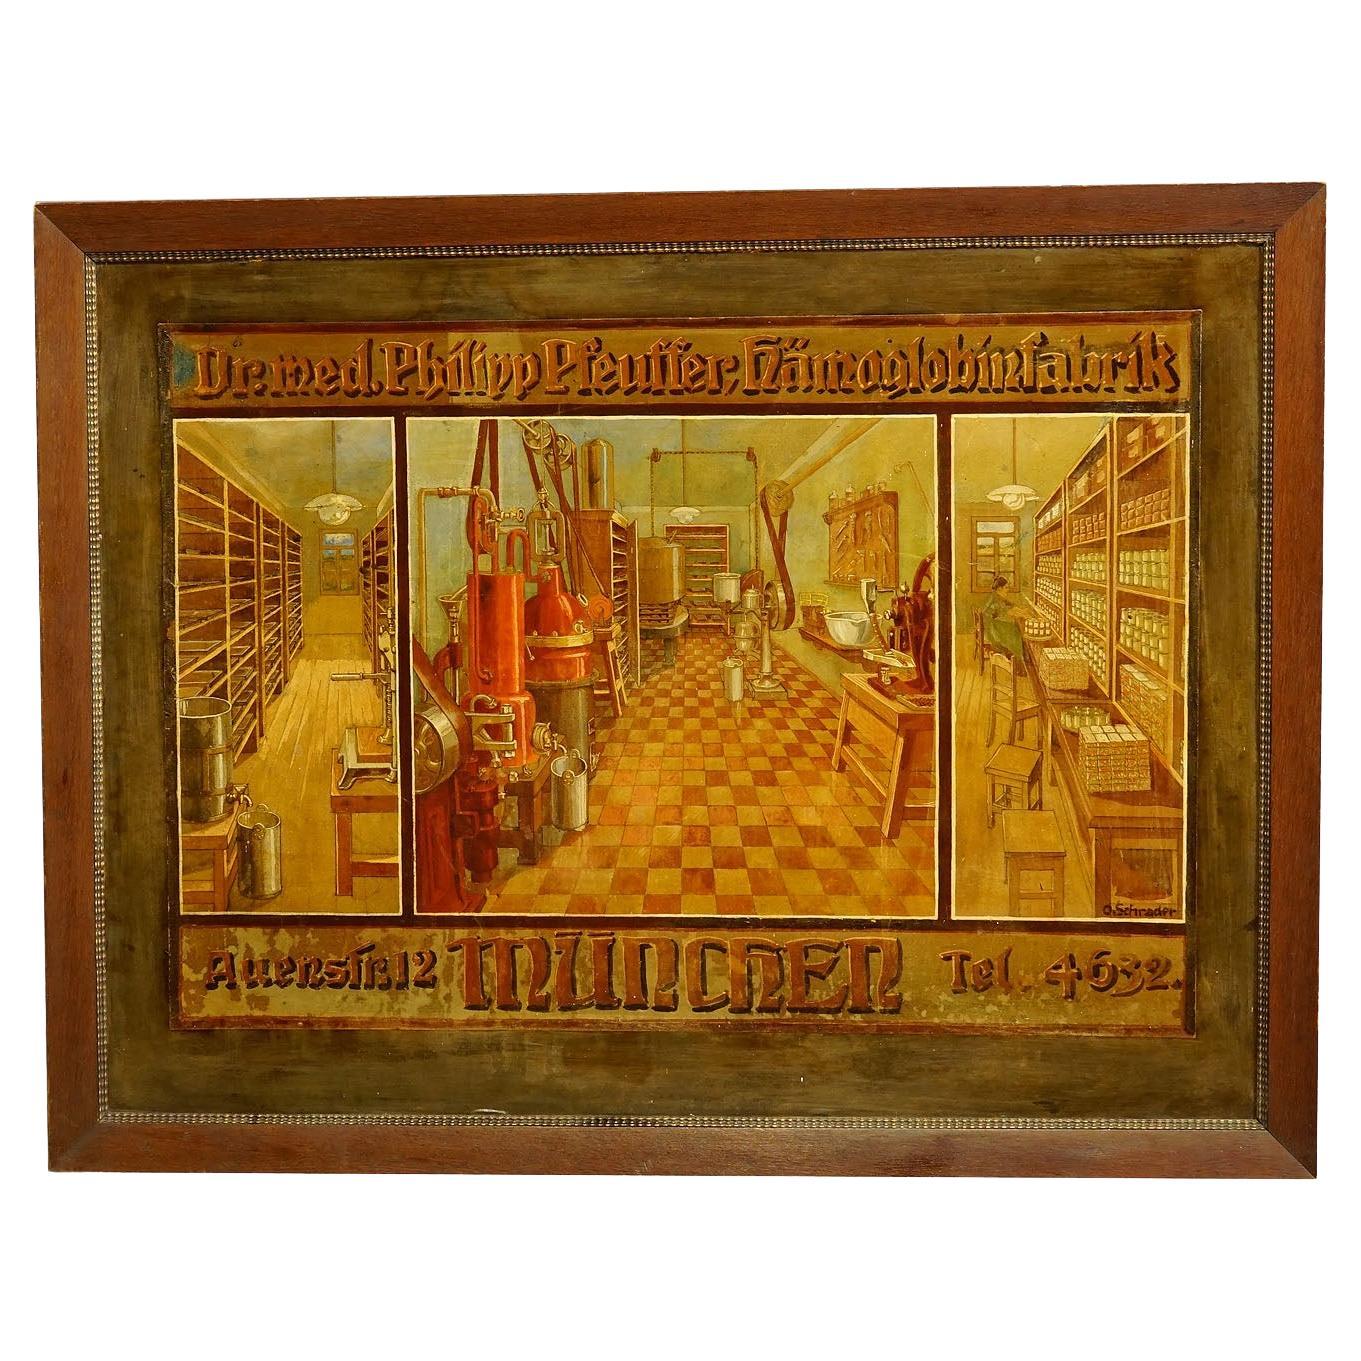 Antique Hand Painted Advertising Poster for a Hemoglobin Fabrication in Munich For Sale